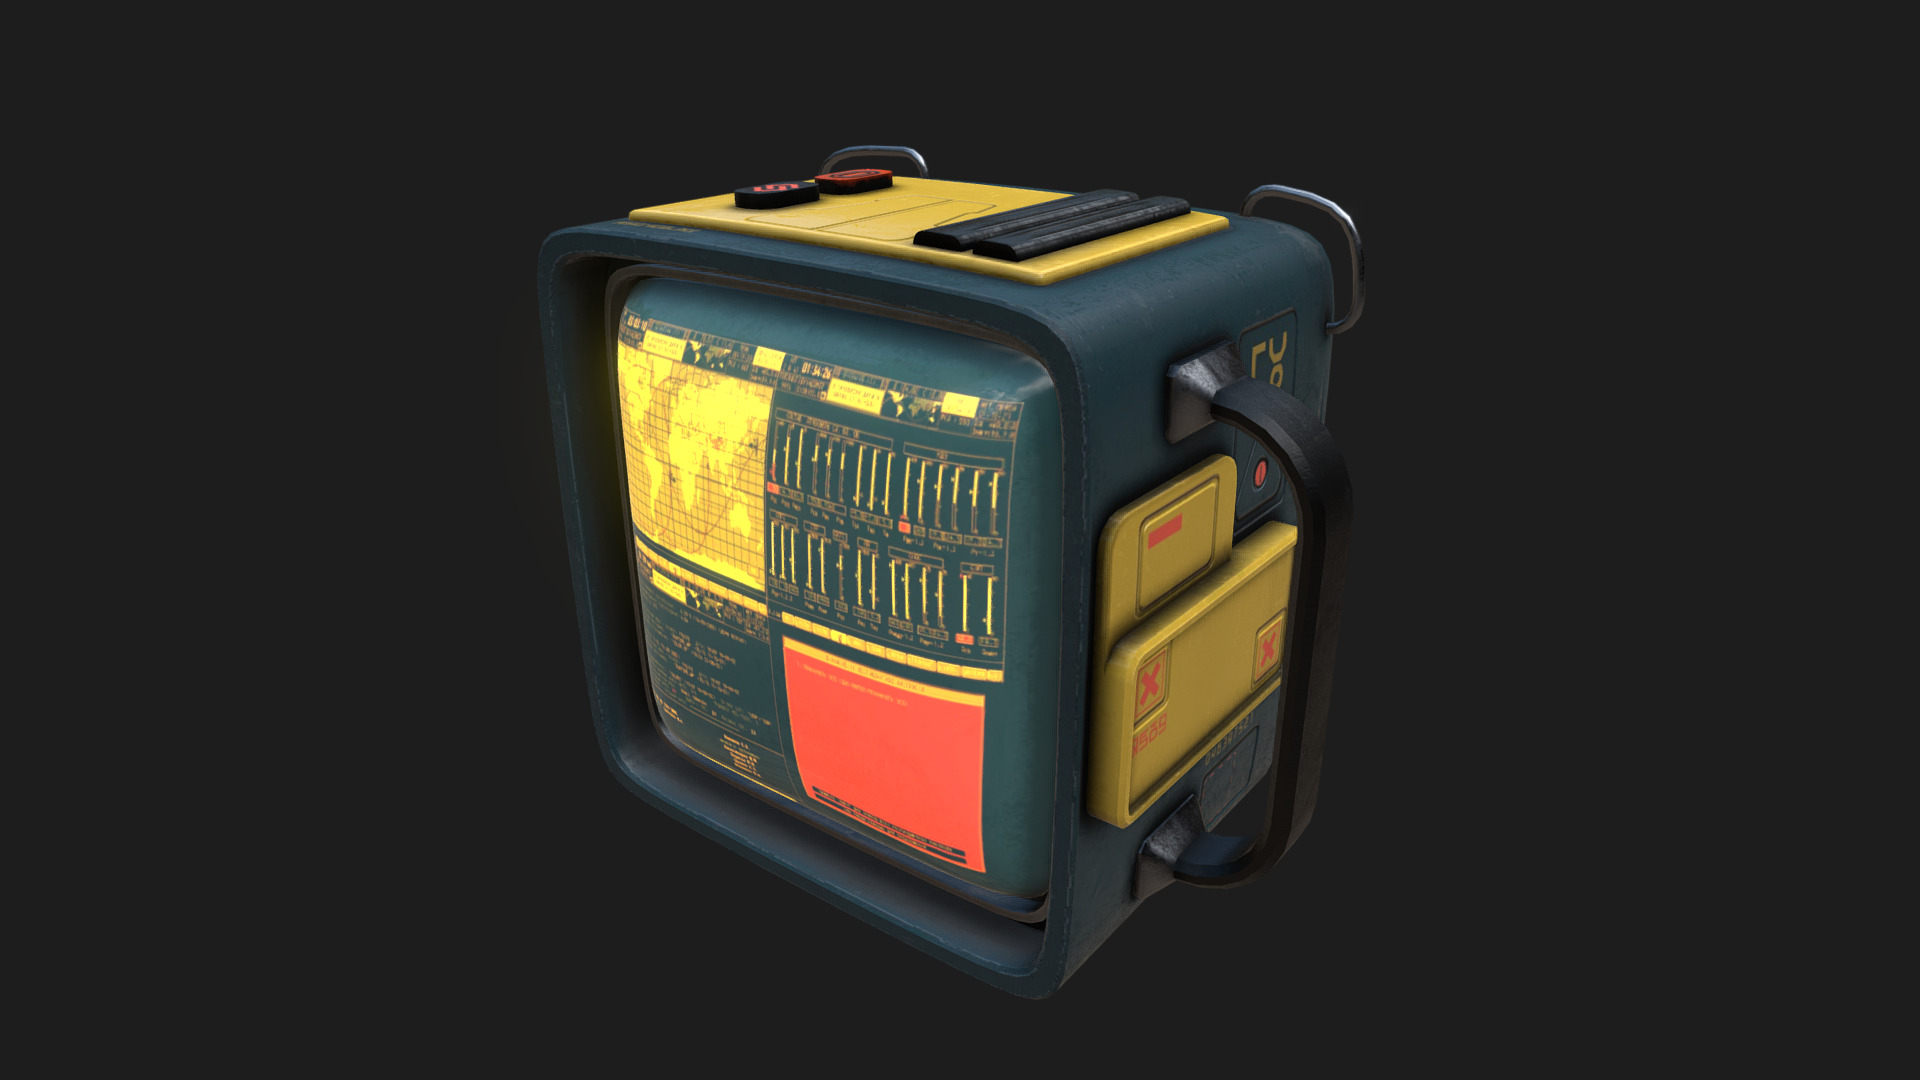 3D model Monitor #1 - This is a 3D model of the Monitor #1. The 3D model is about a yellow and black electronic device.